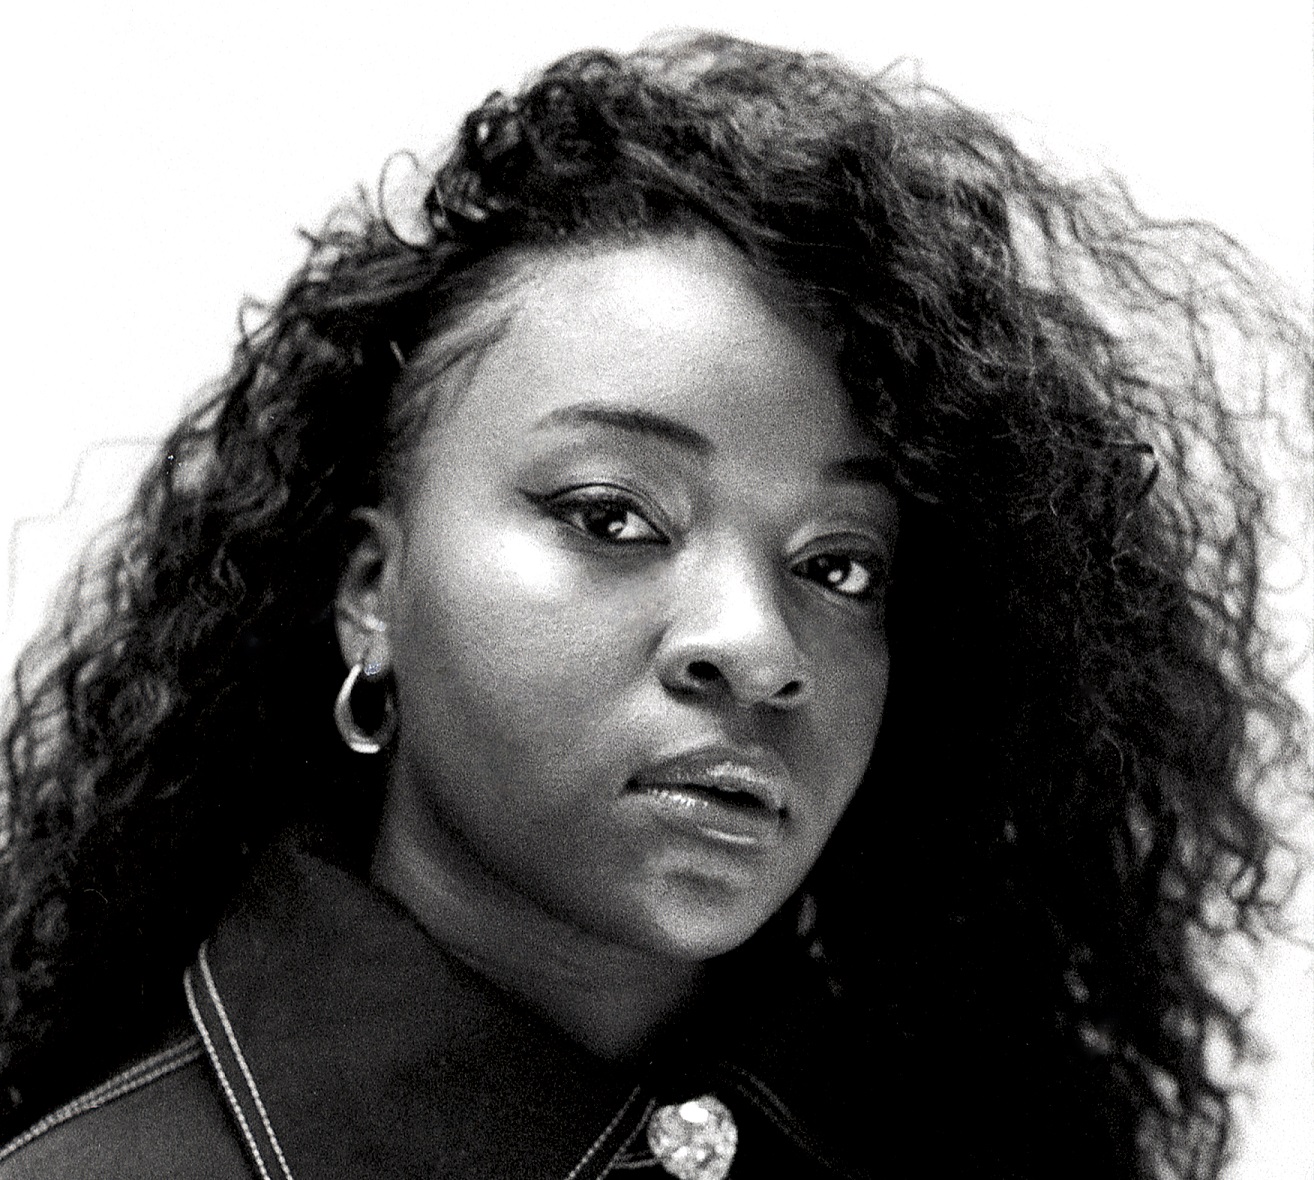 Ray BLK © HL Brown